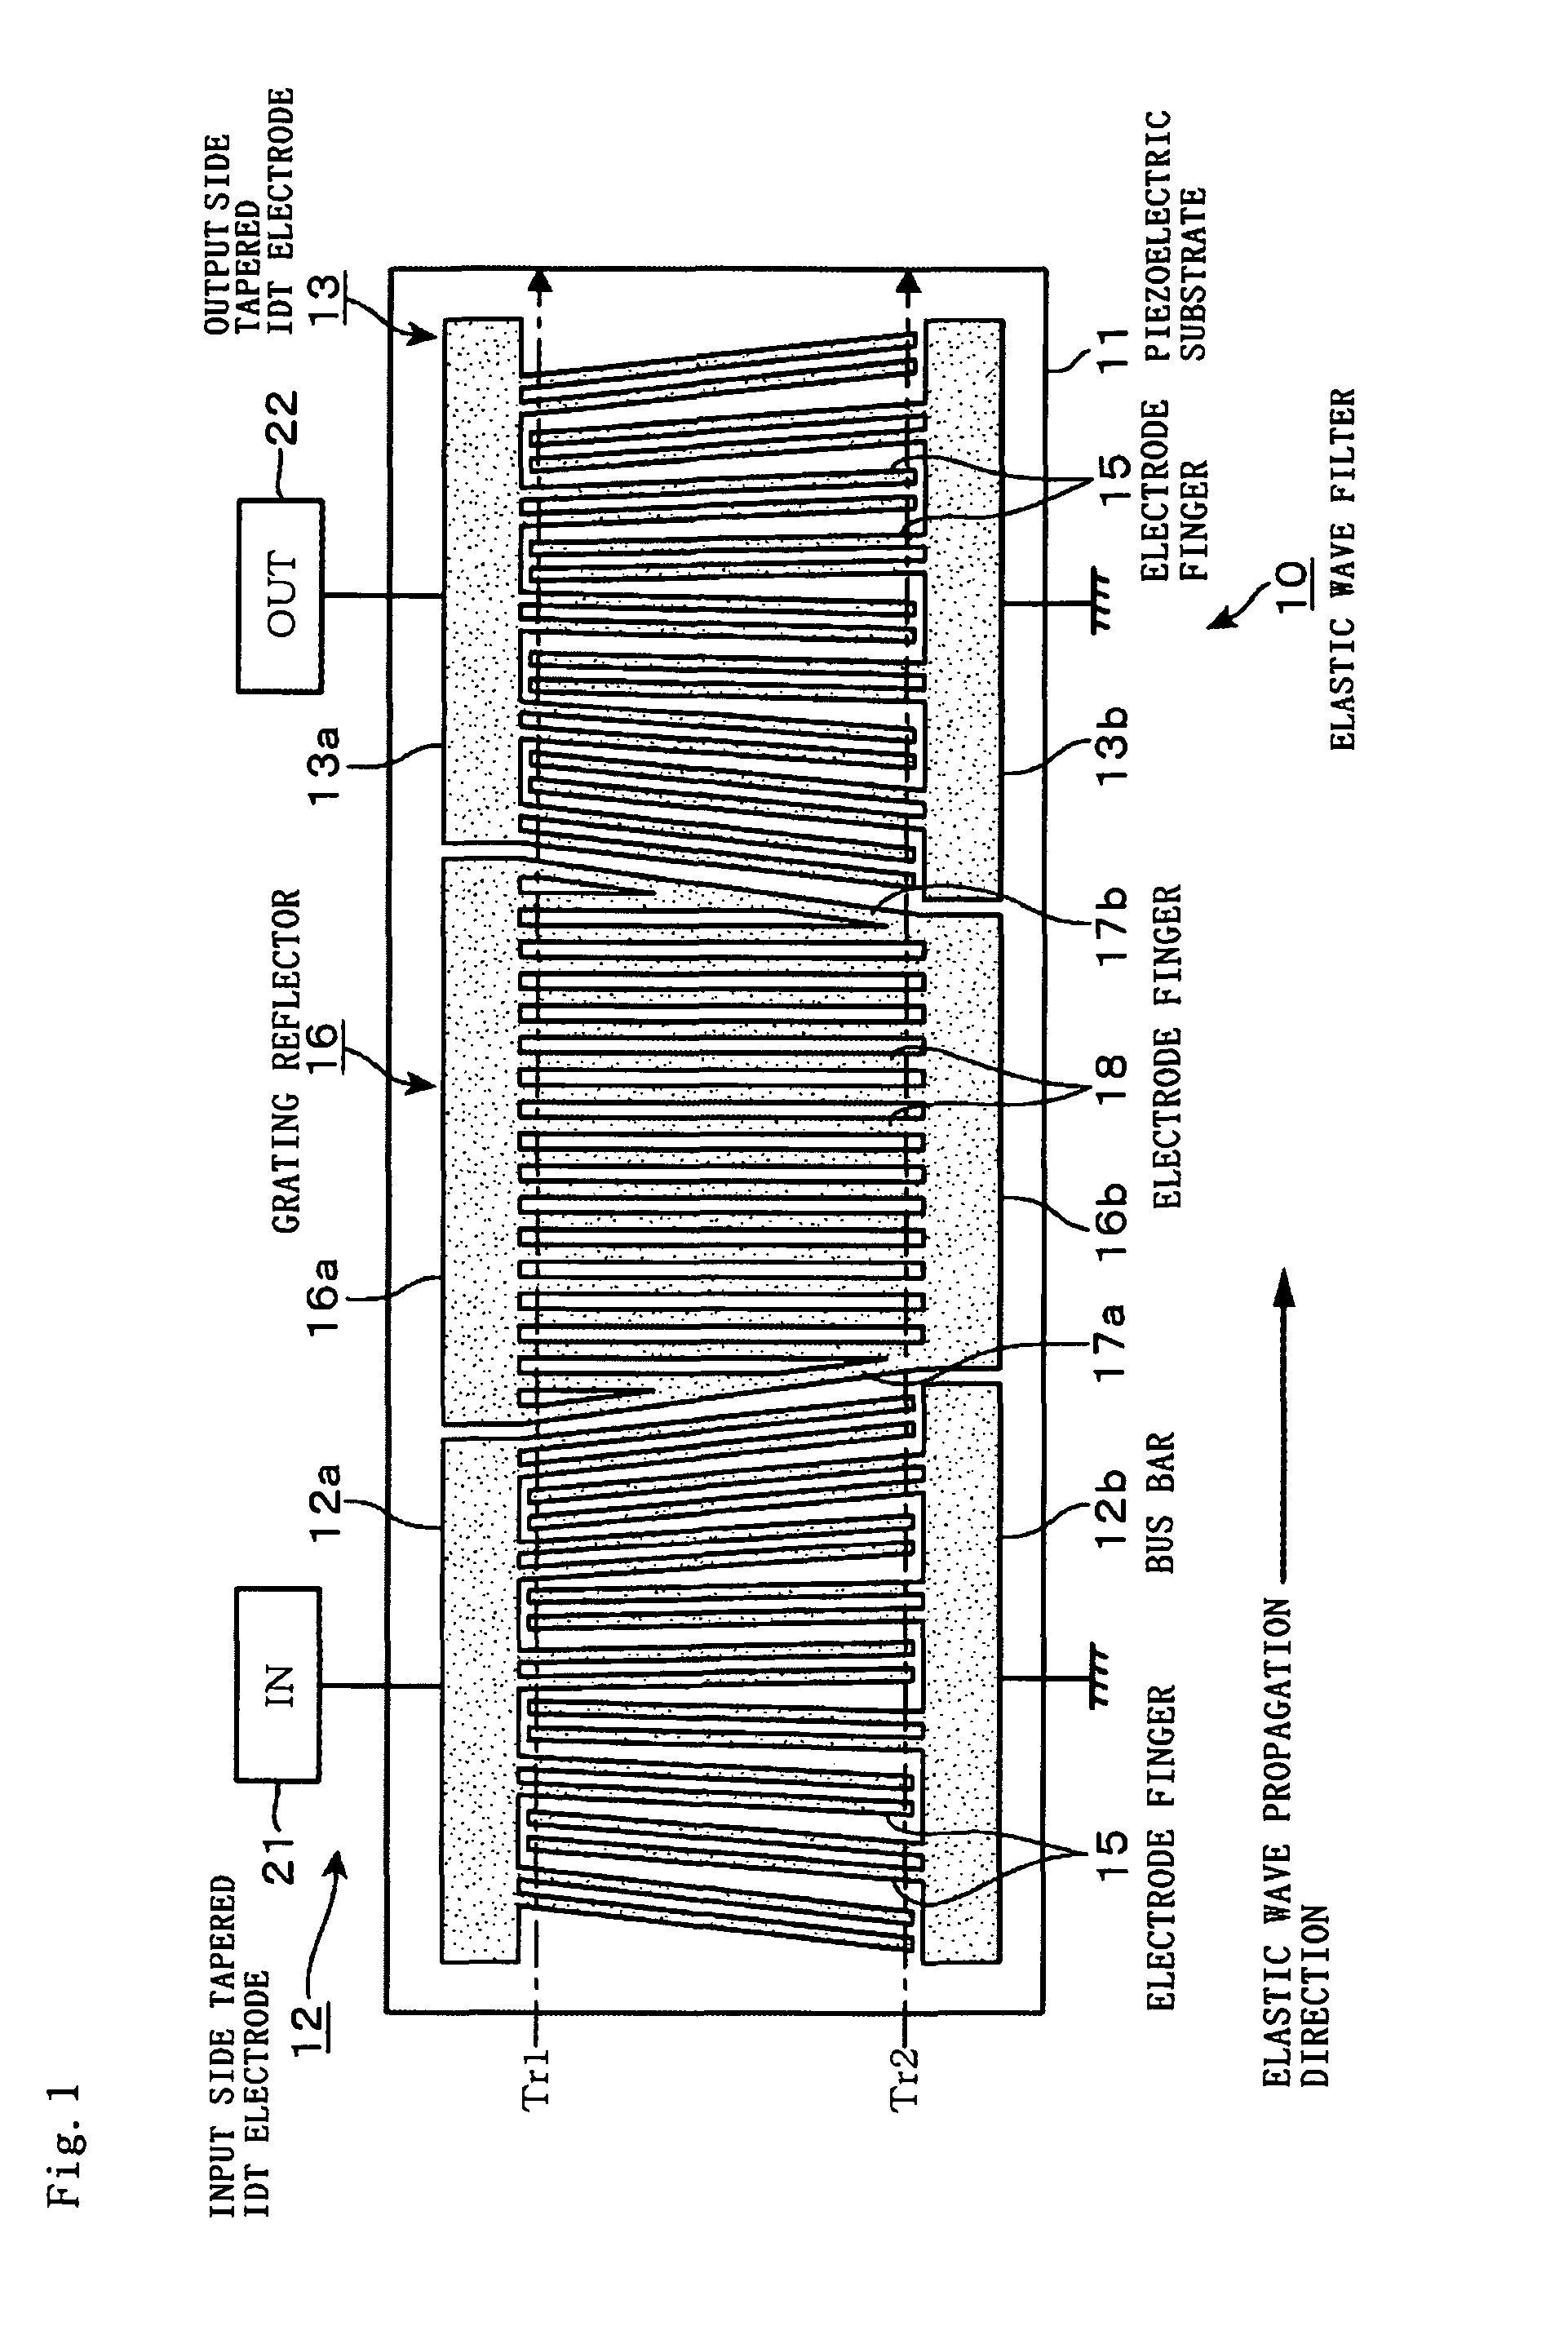 Elastic wave filter including a grating reflector between tapered input and output IDT electrodes